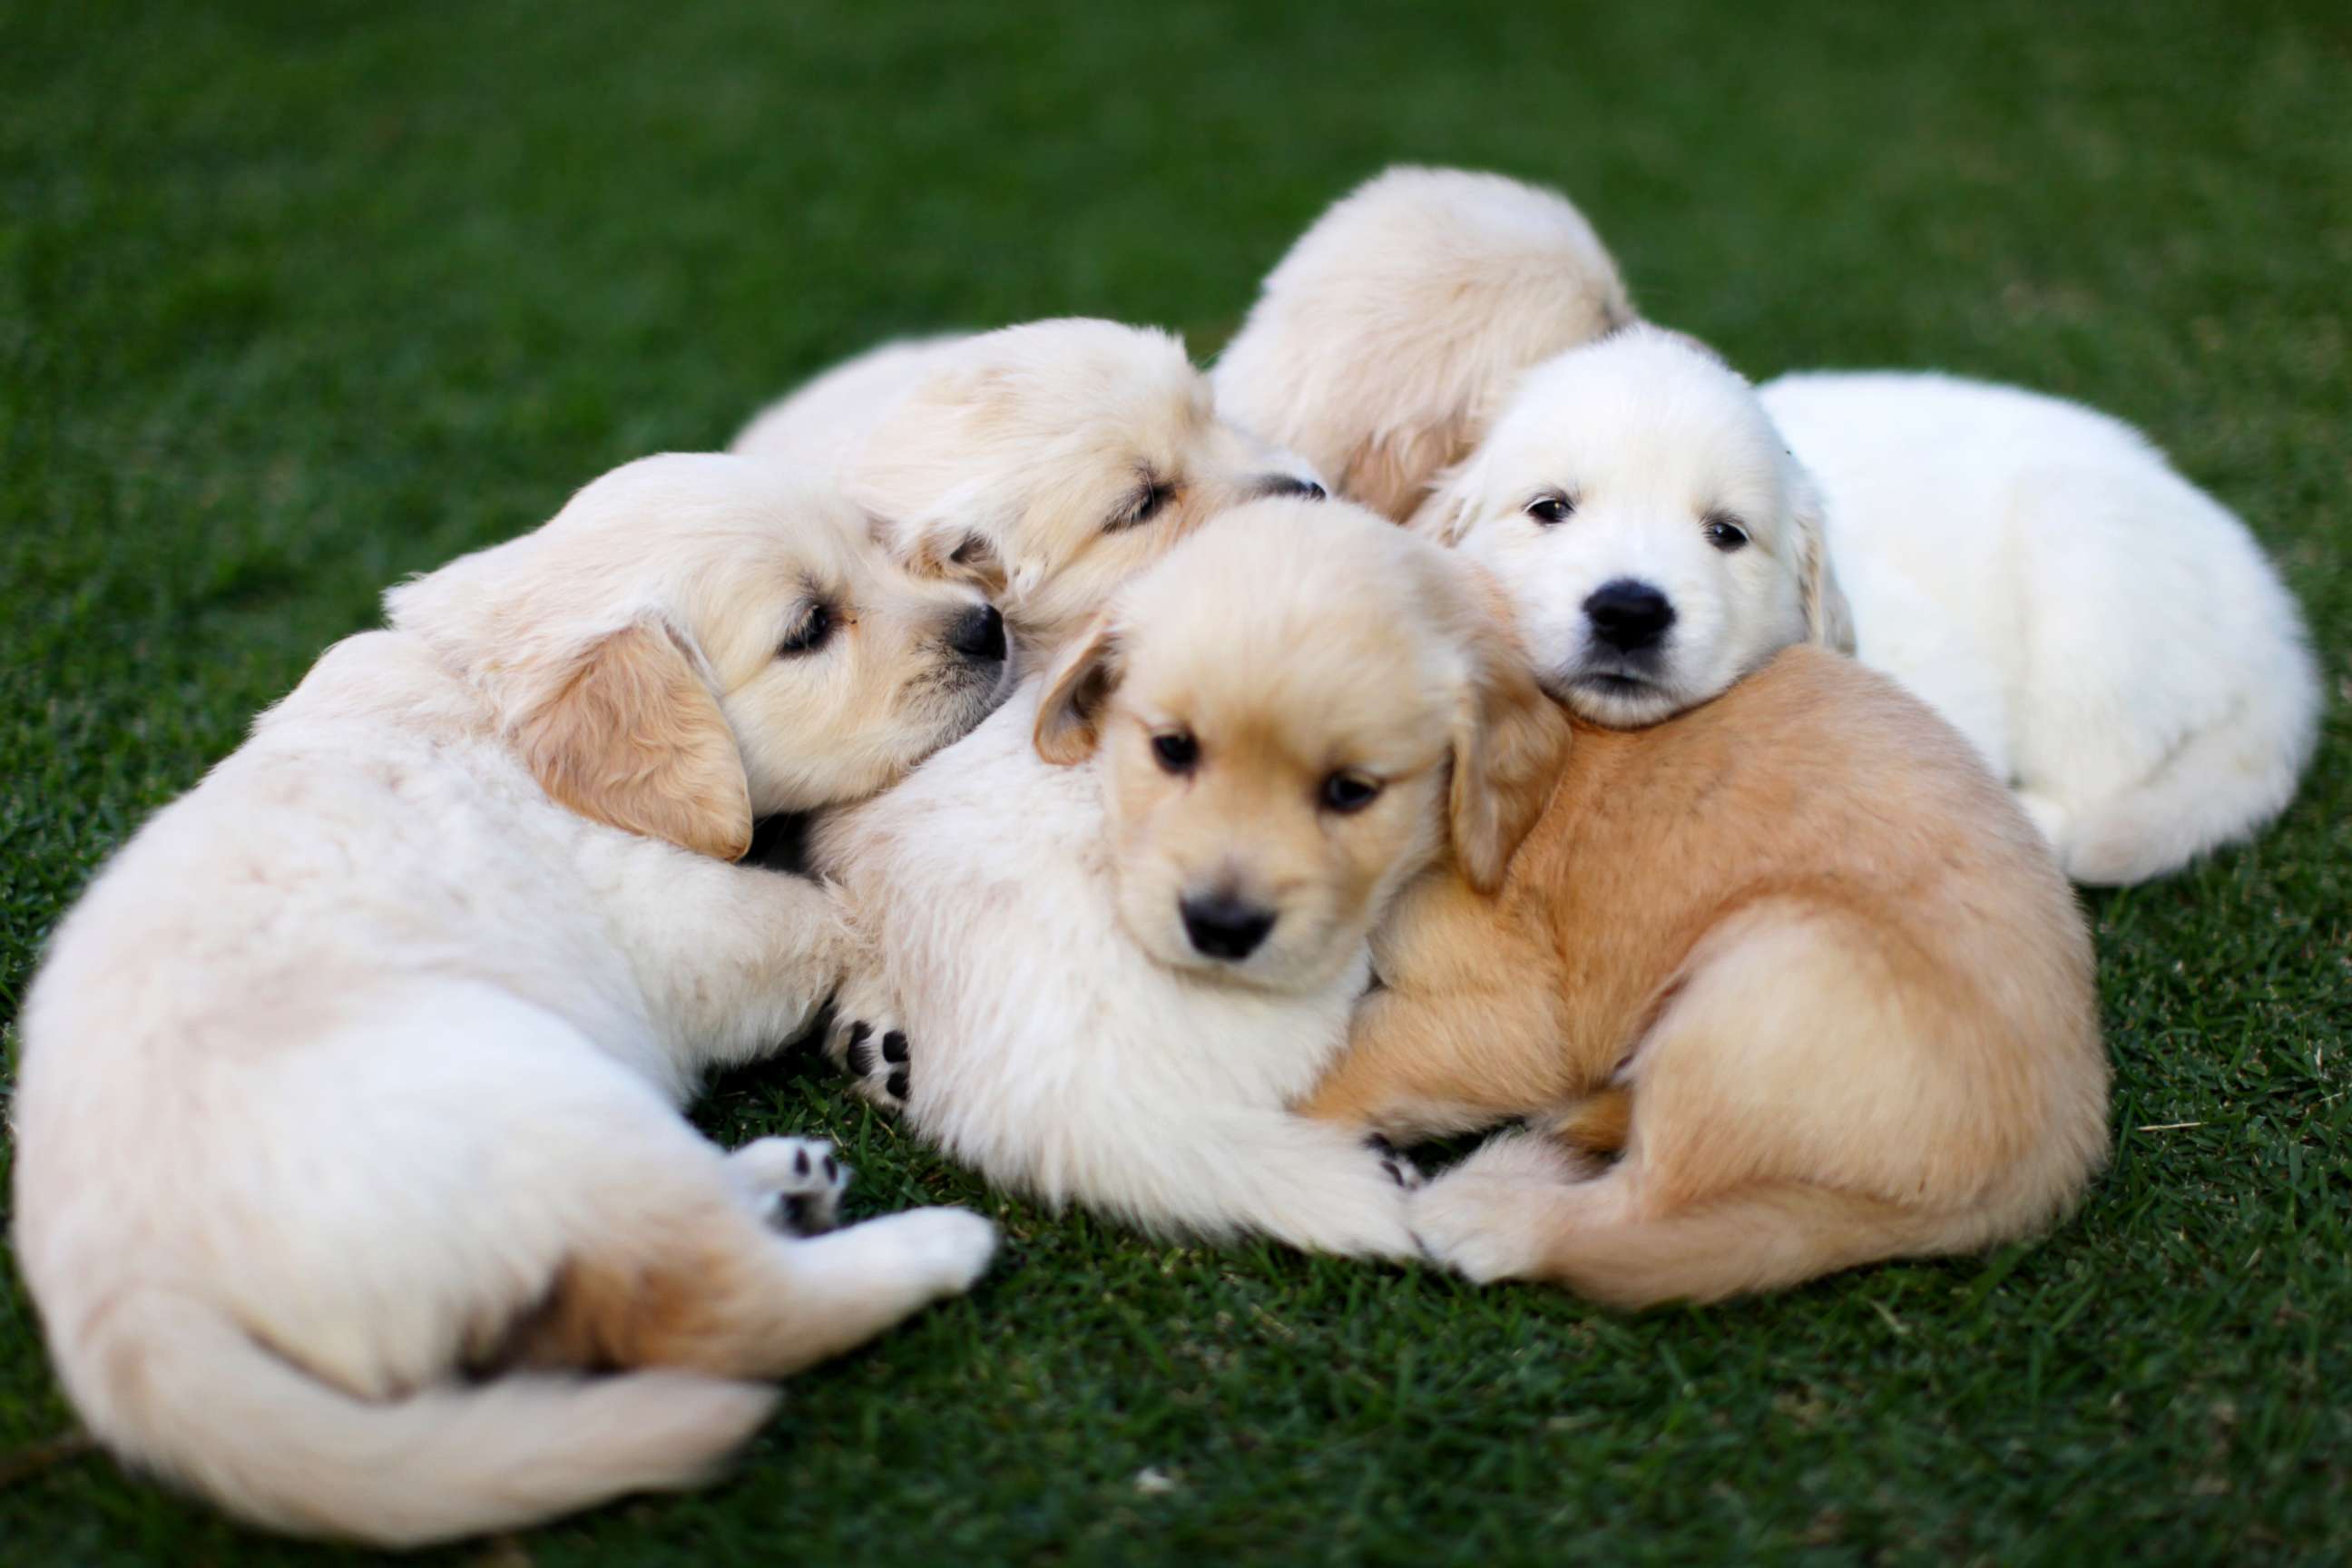 PHOTO: Puppies curl up together on the grass in this stock photo.